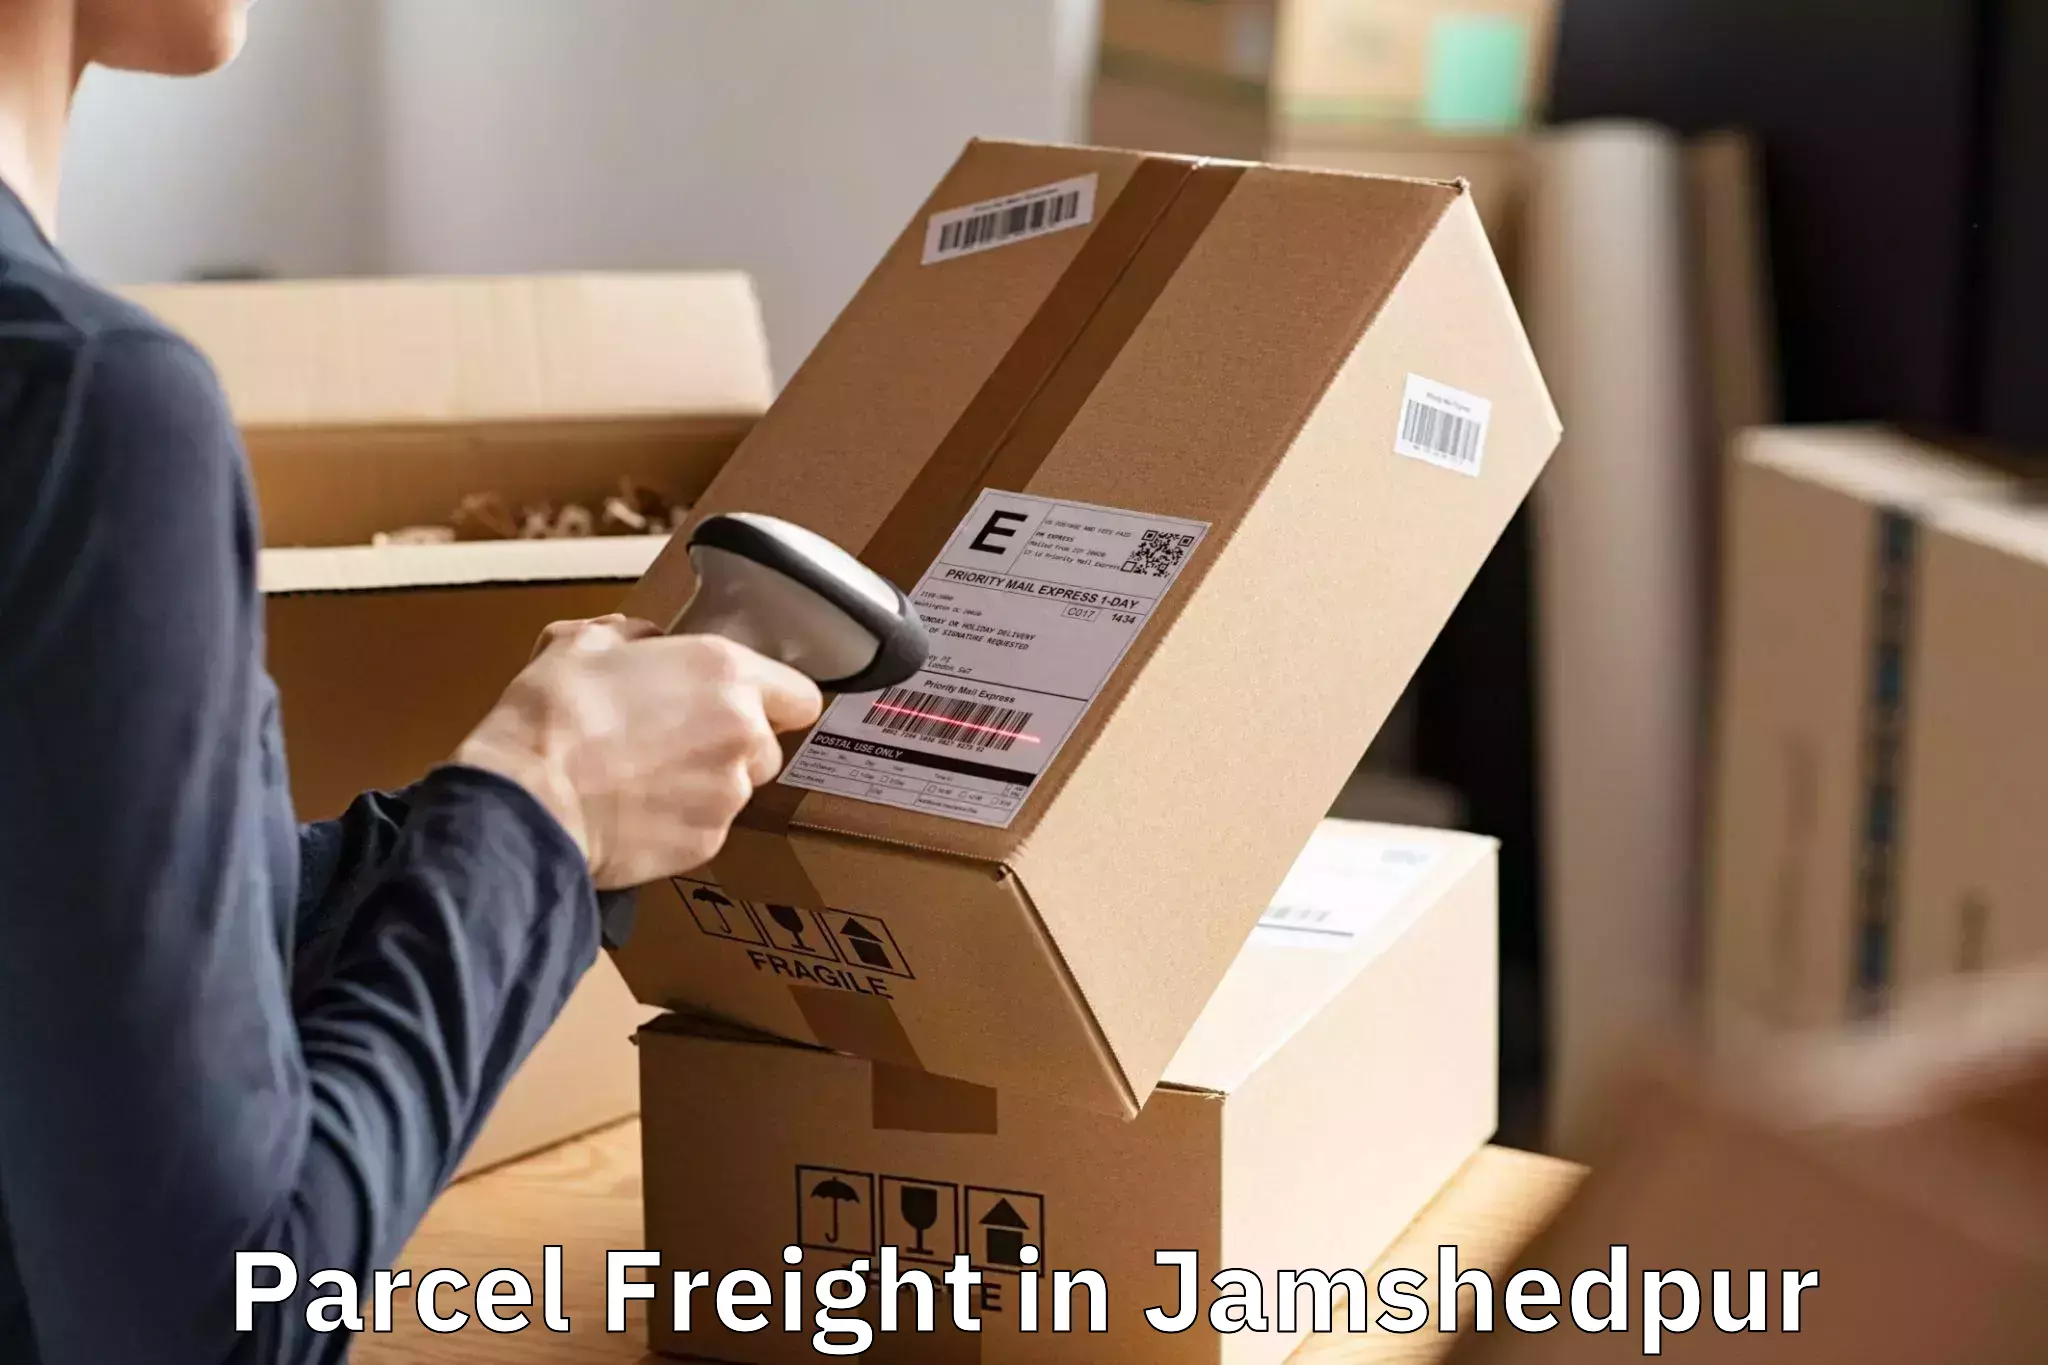 Trusted Parcel Freight in Jamshedpur, Jharkhand (JH)